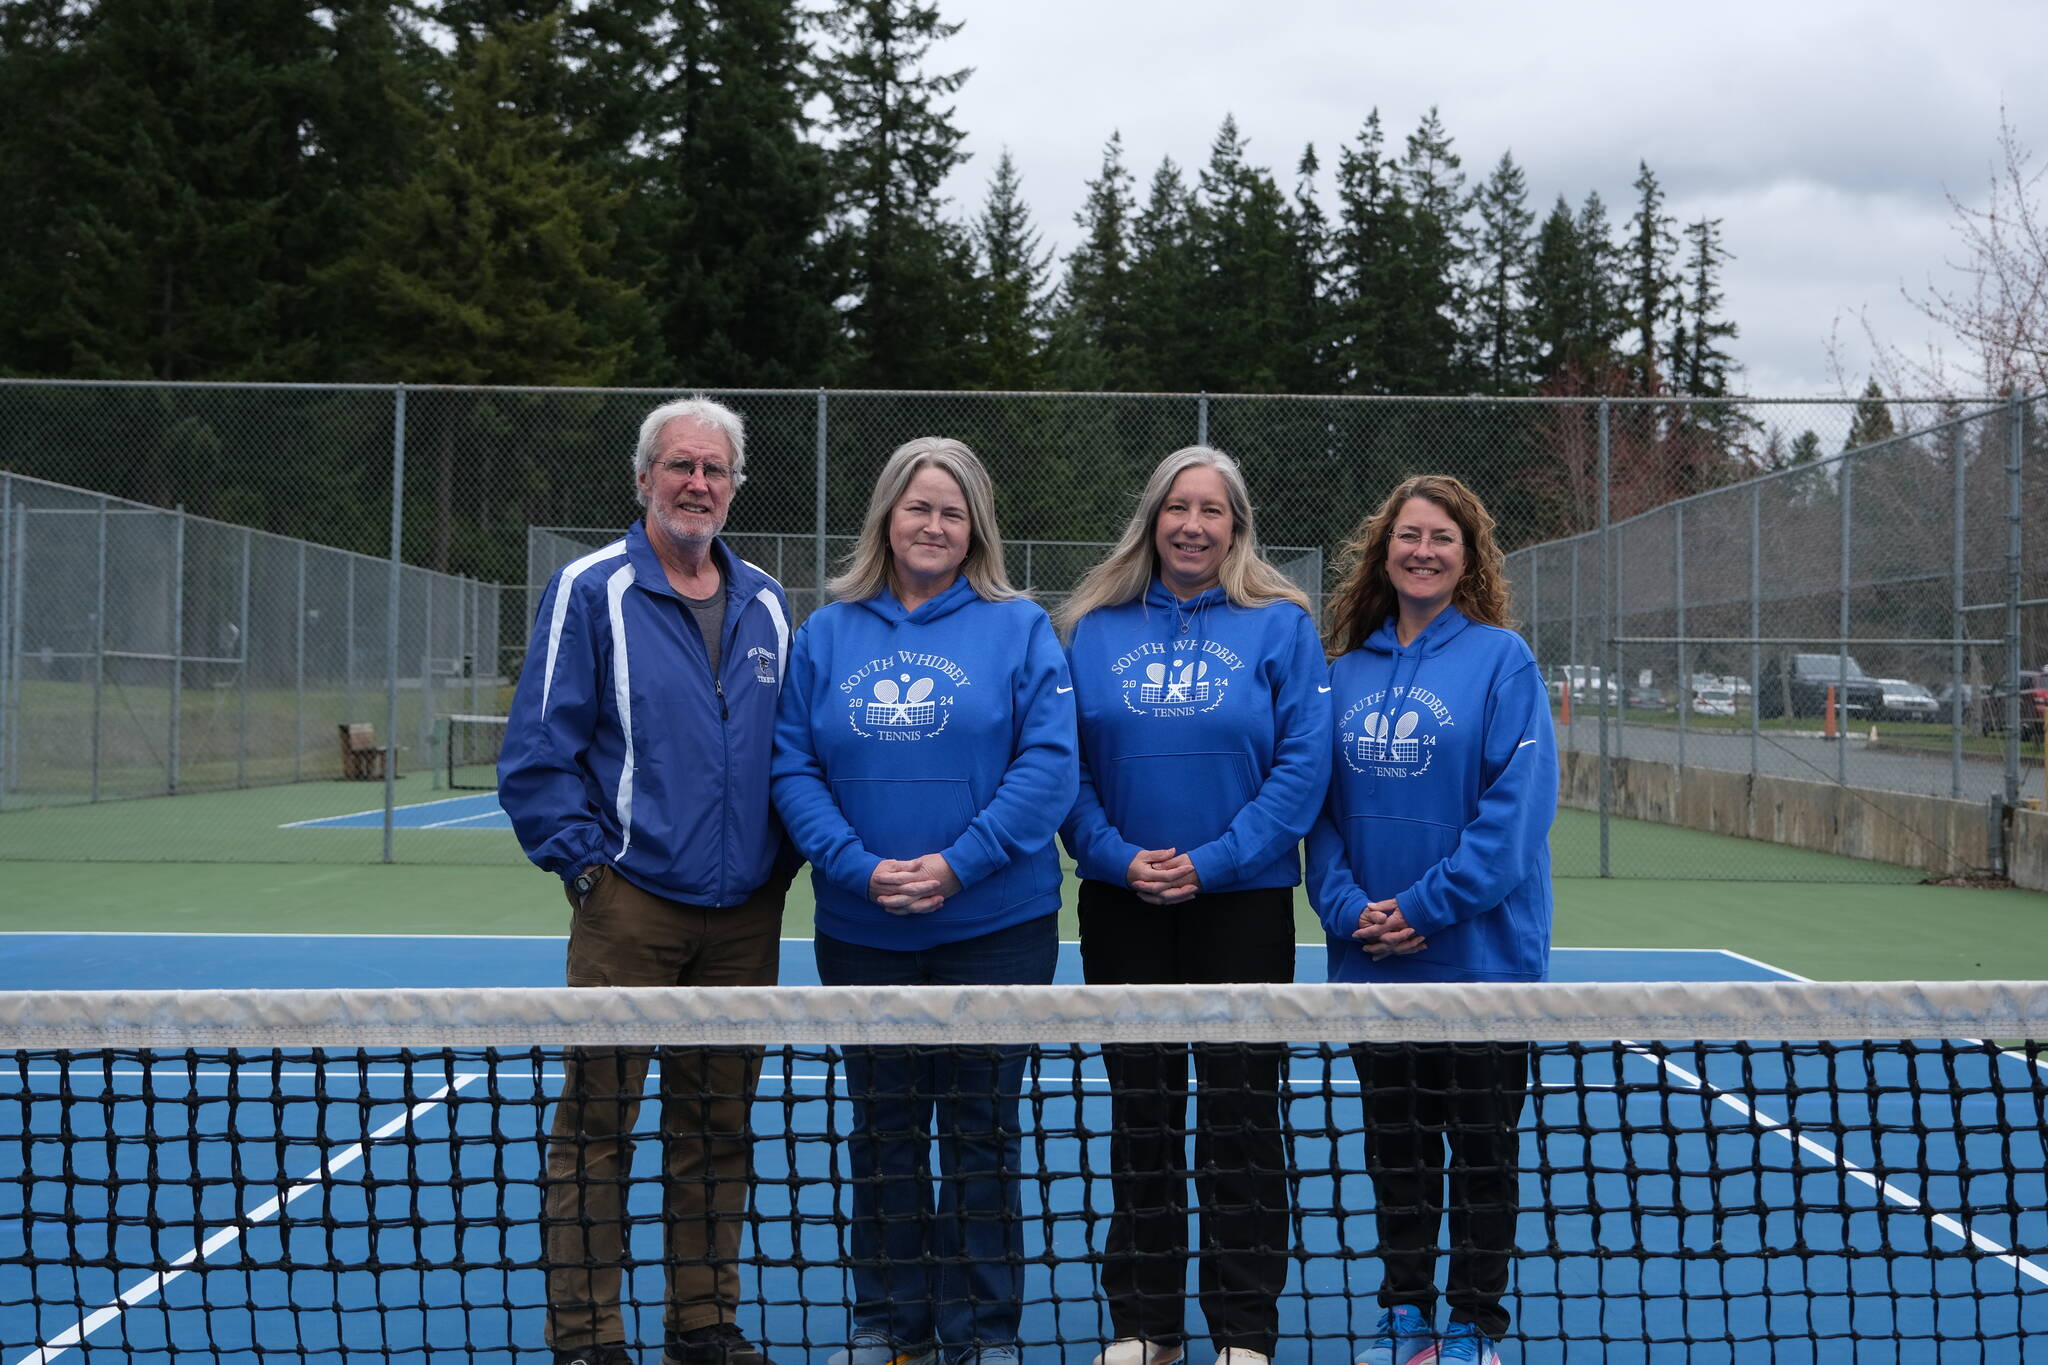 South Whidbey’s girls tennis coaches will retire at the end of the season. Pictured from left are volunteer Tom Kramer, who coached from 1978-2012, current coach Karyle Kramer and assistant coaches Bess Windecker-Nelson and Jenny Gochanour. (Photo by Nathan Whalen)